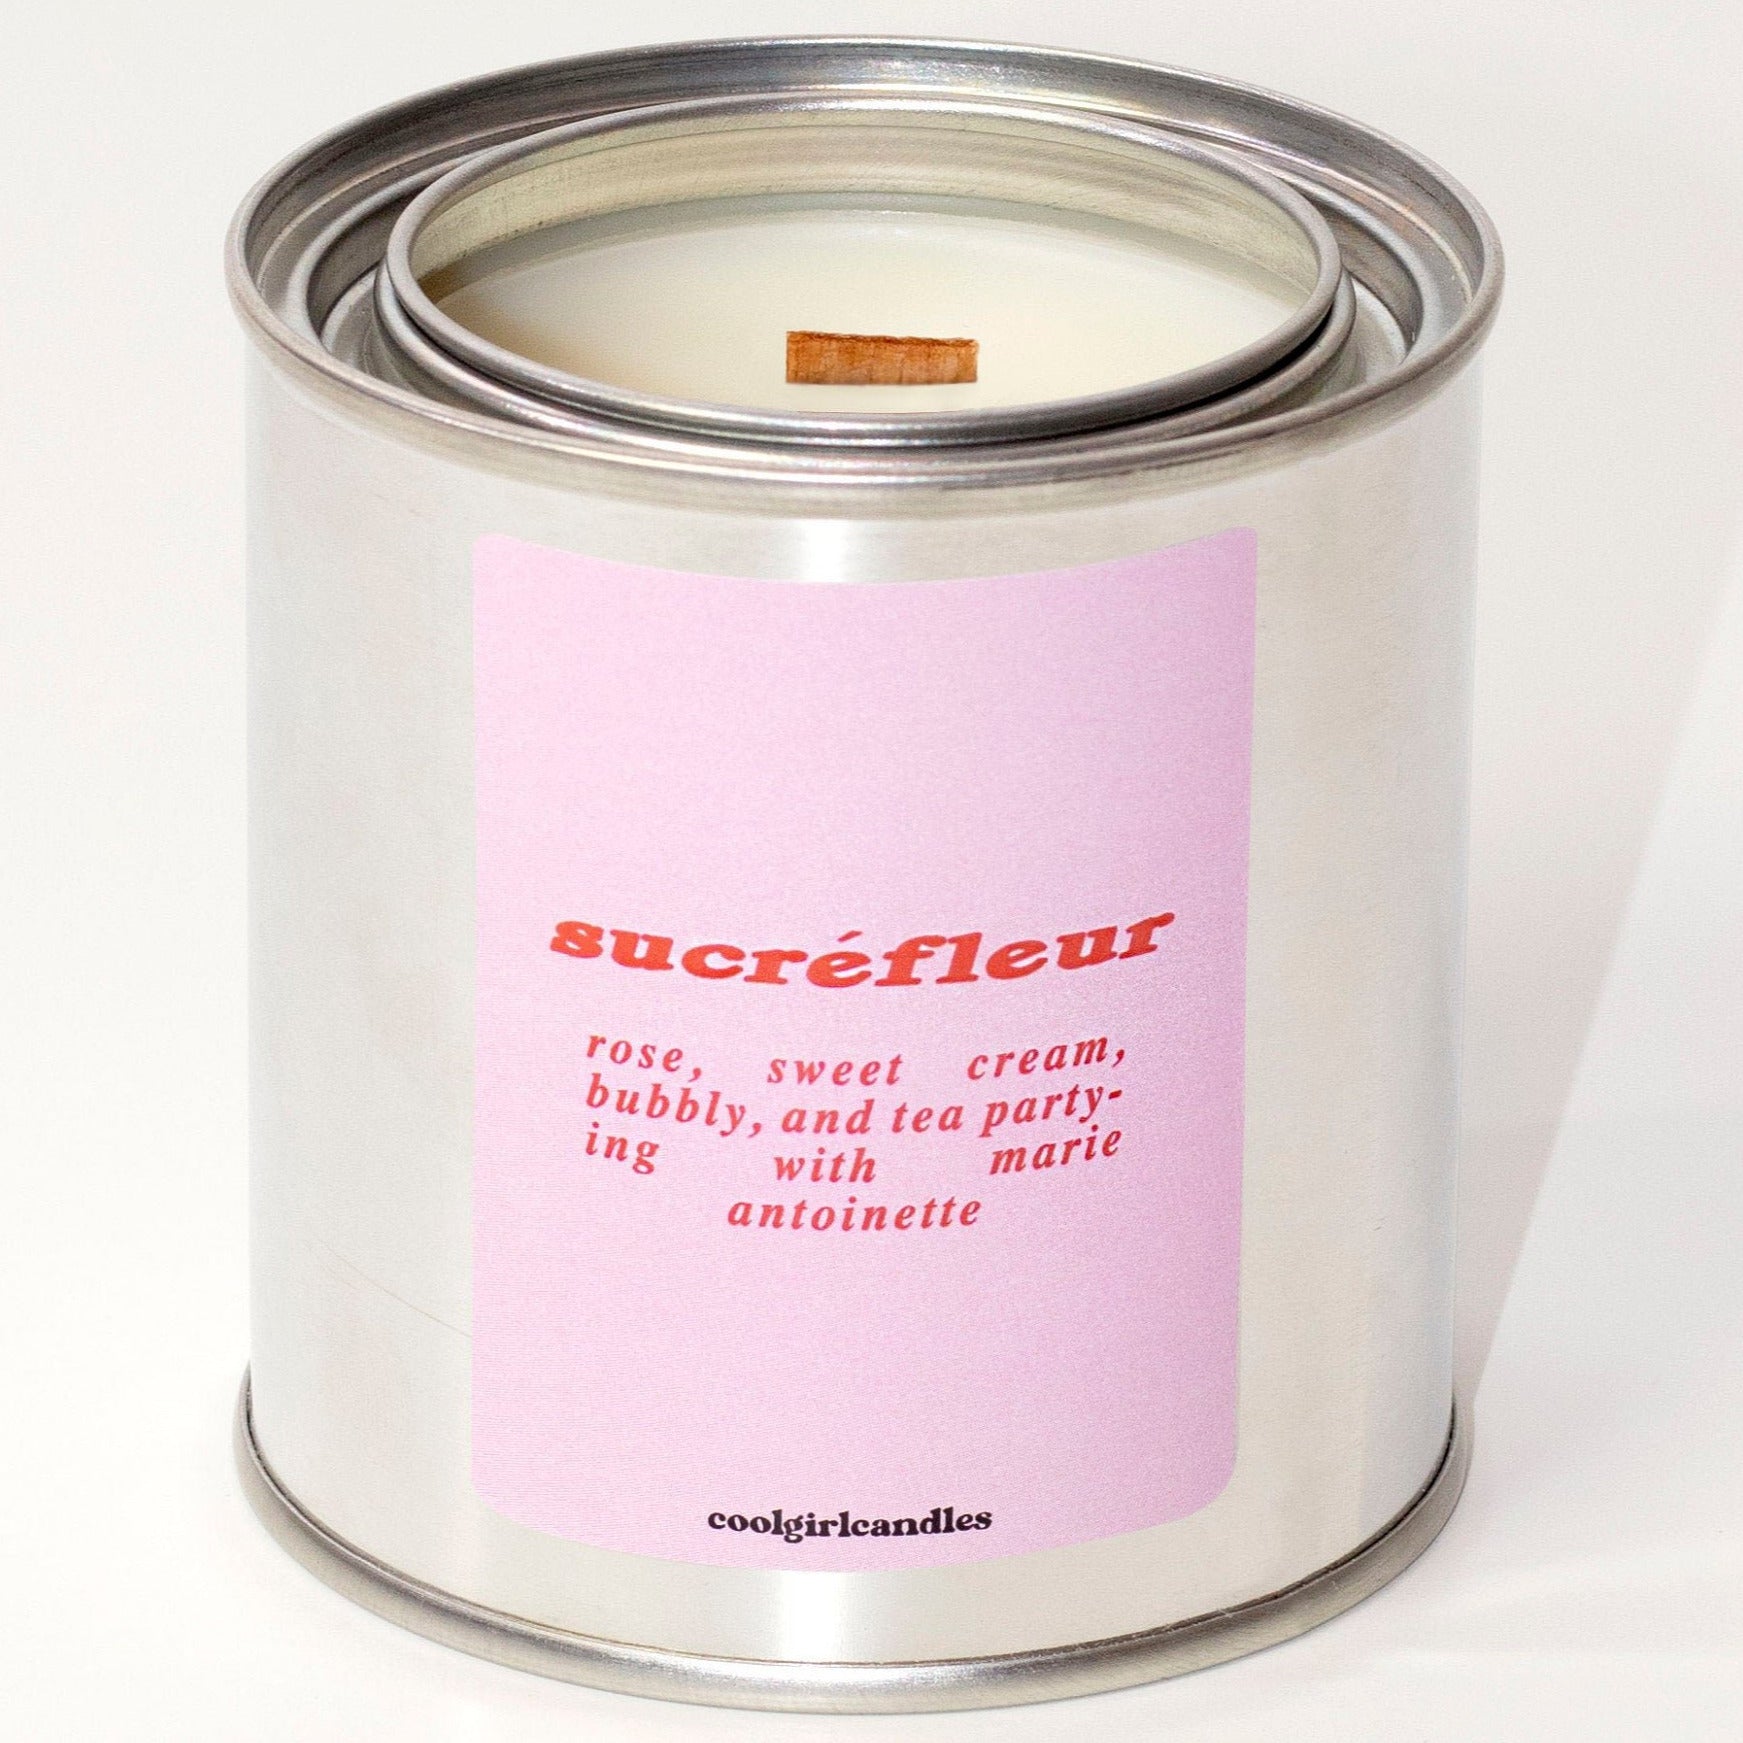 Floral scented candle by cool girl candles. Sucrefleur smells floral, sweet, and sparkly for an effervescent scent that fills the room.